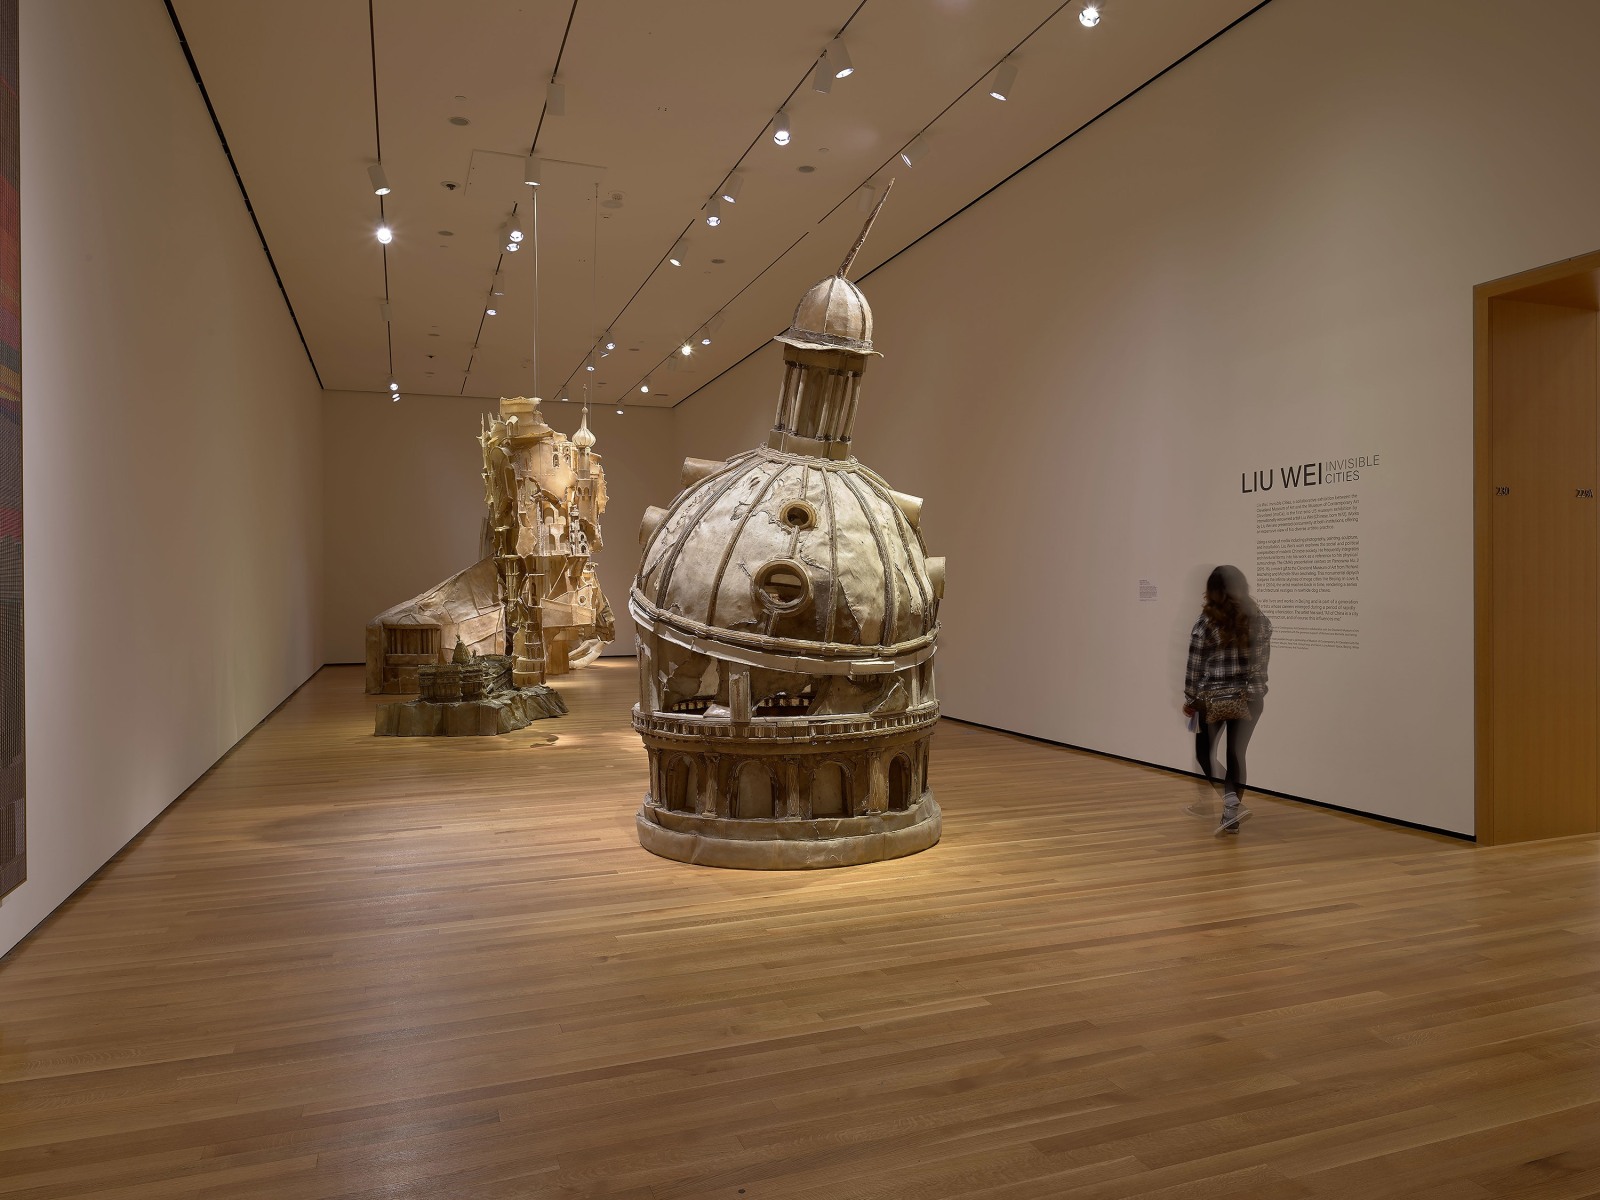 View 6 of Liu Wei's solo museum exhibition titled Invisible Cities at the Cleveland Museum of Art